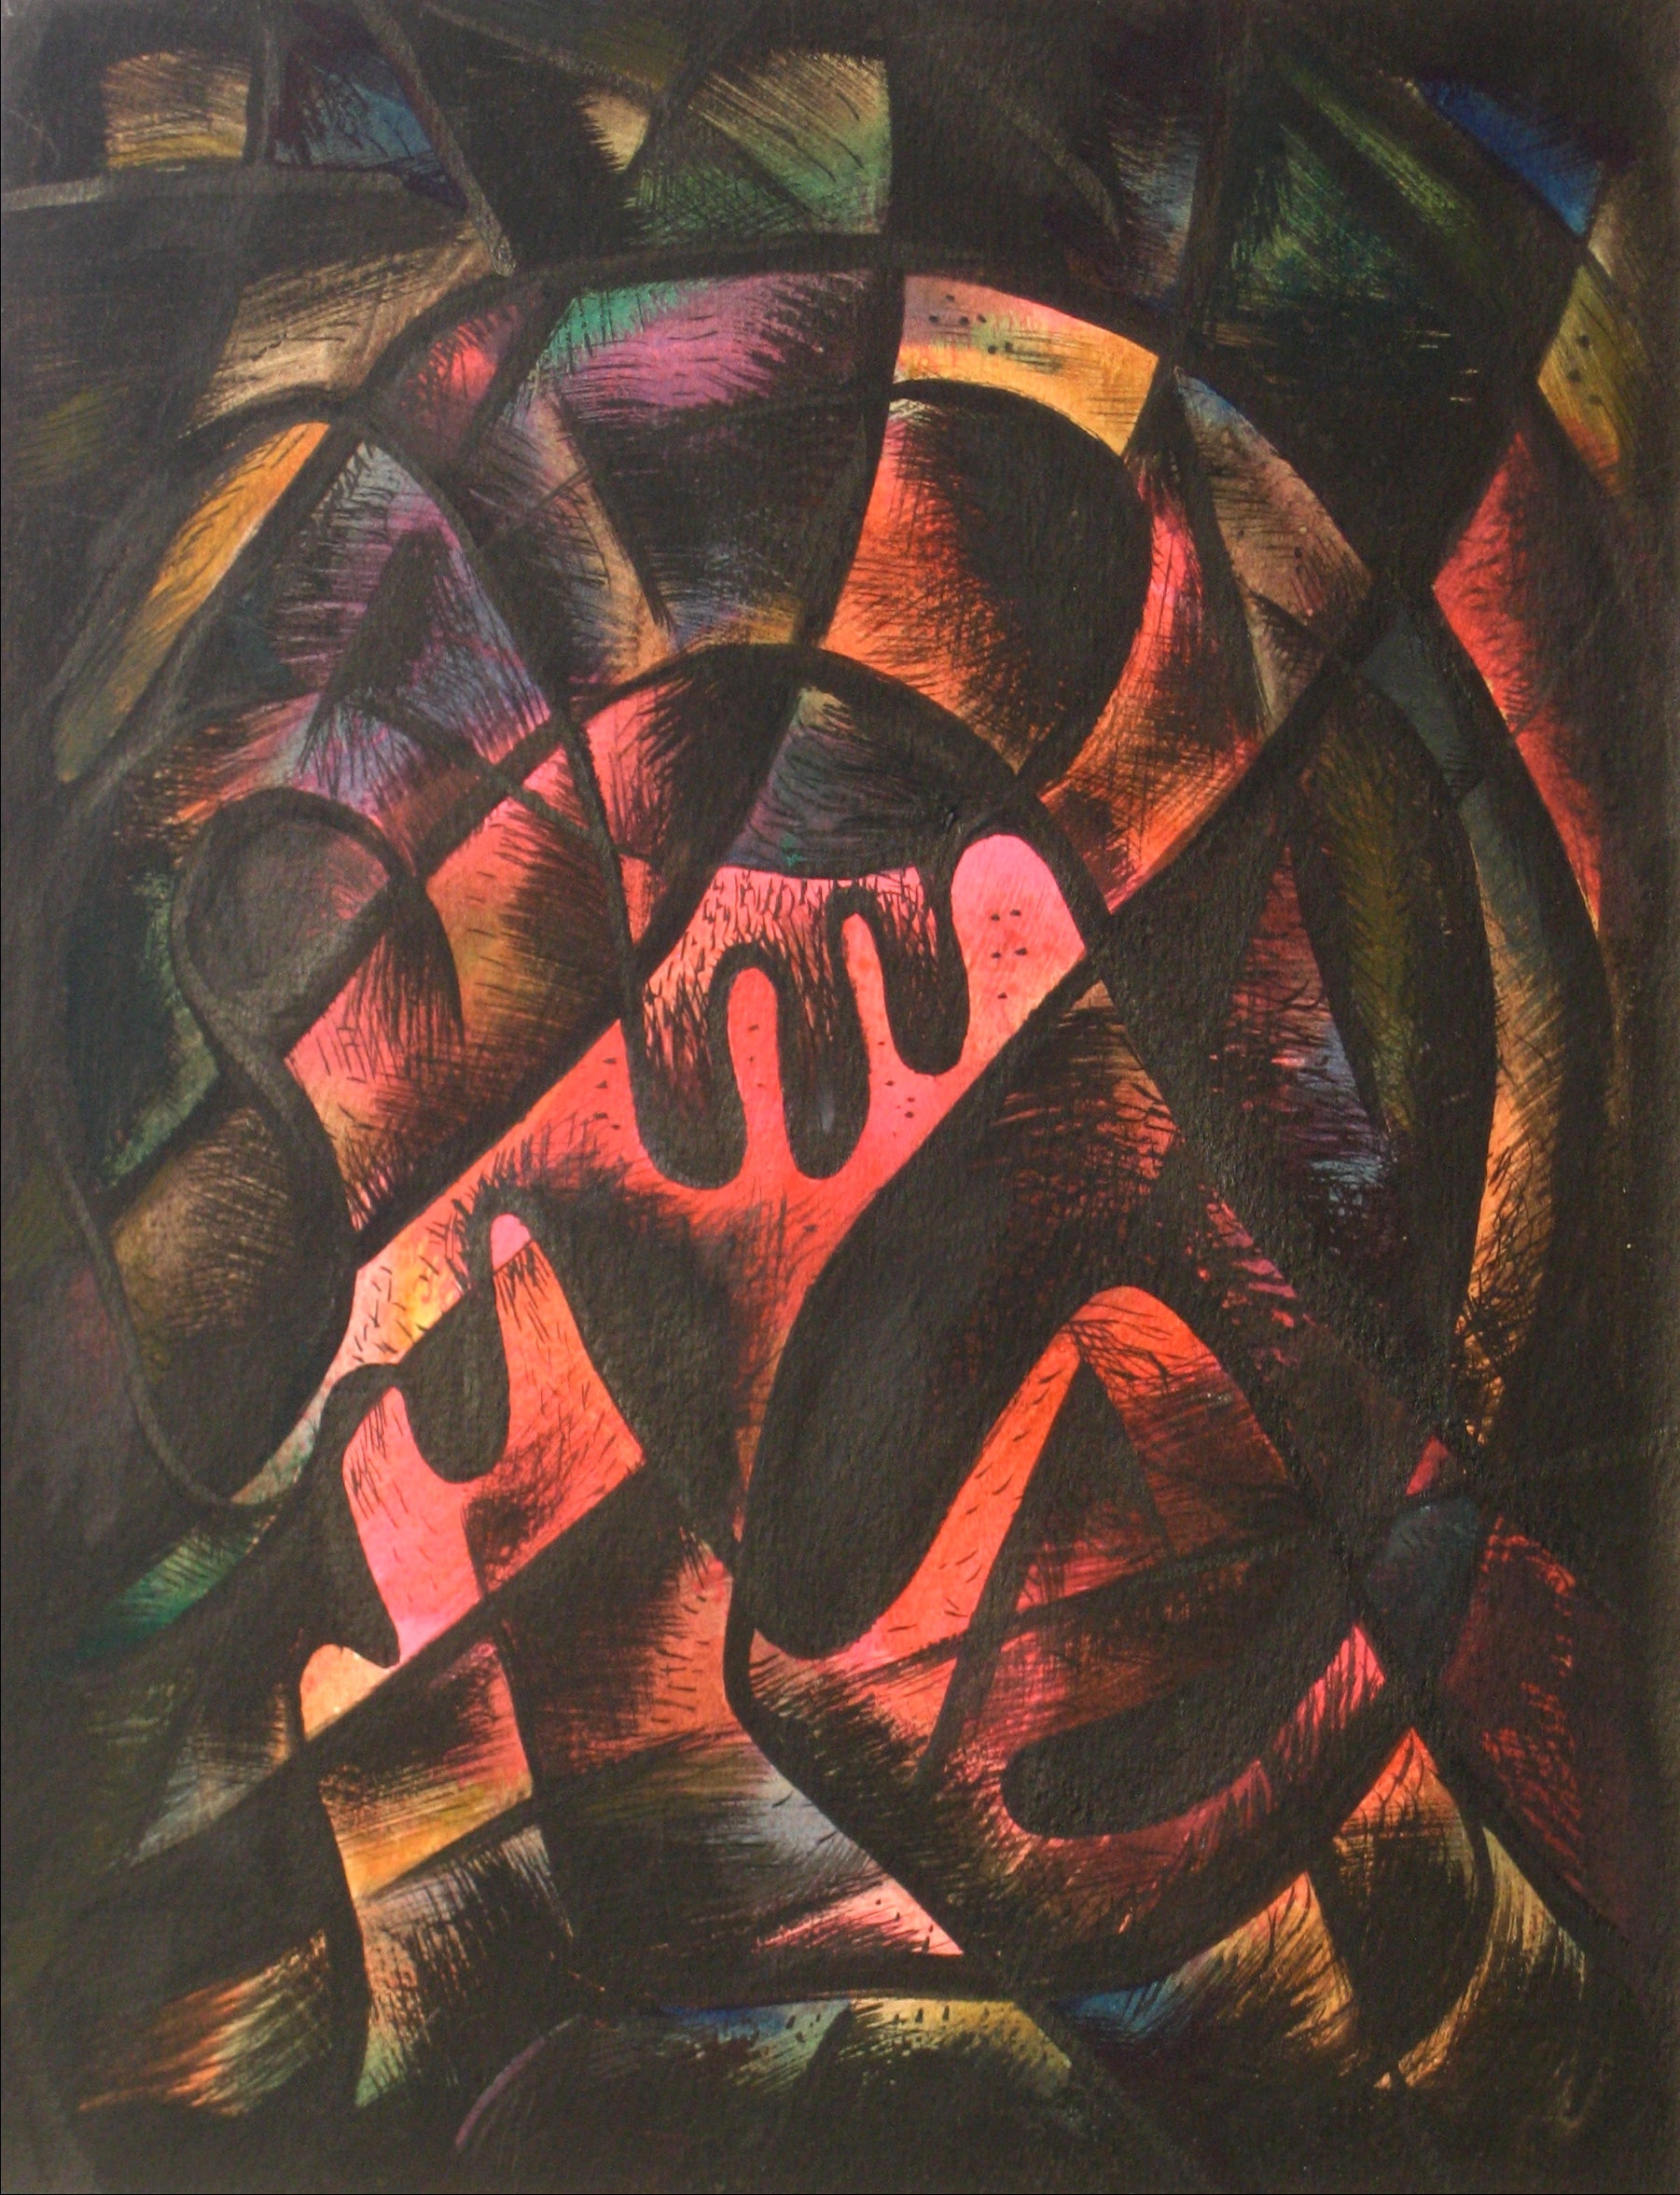 Neon Surrealist Abstract<br>1940s, Tempera Paint on Paper<br><br>#13529